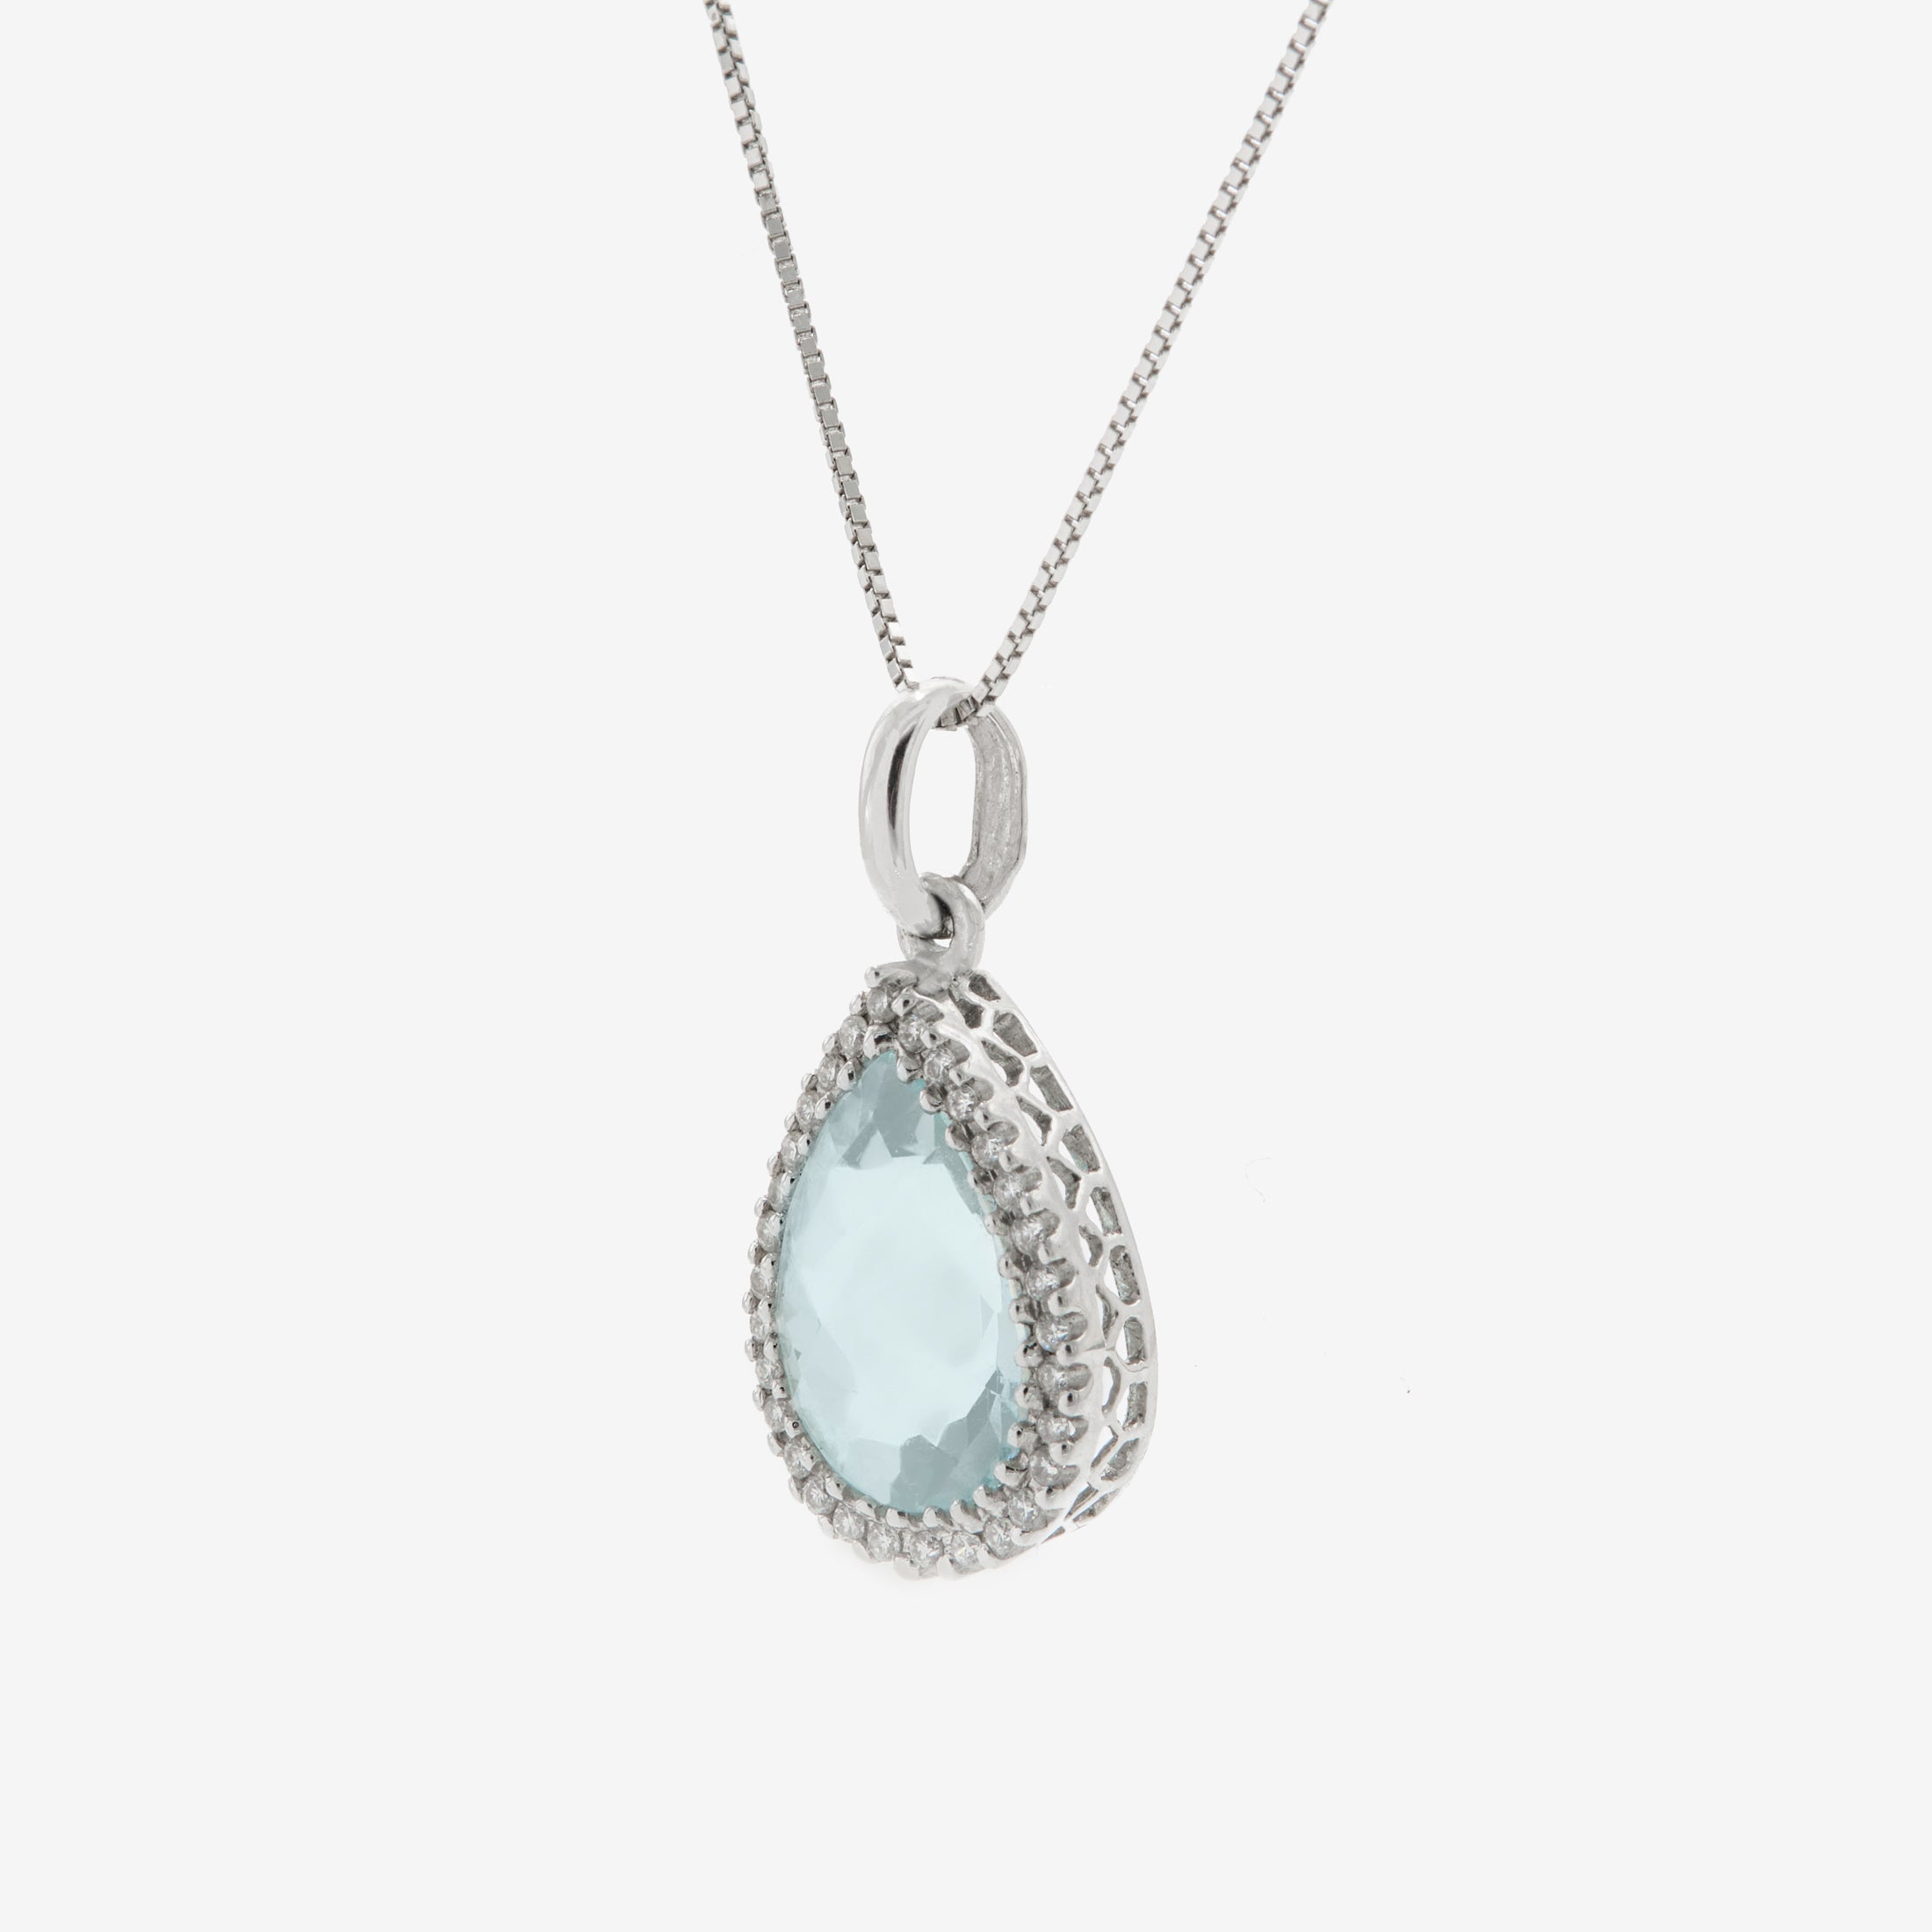 Pear necklace with aquamarine and diamonds